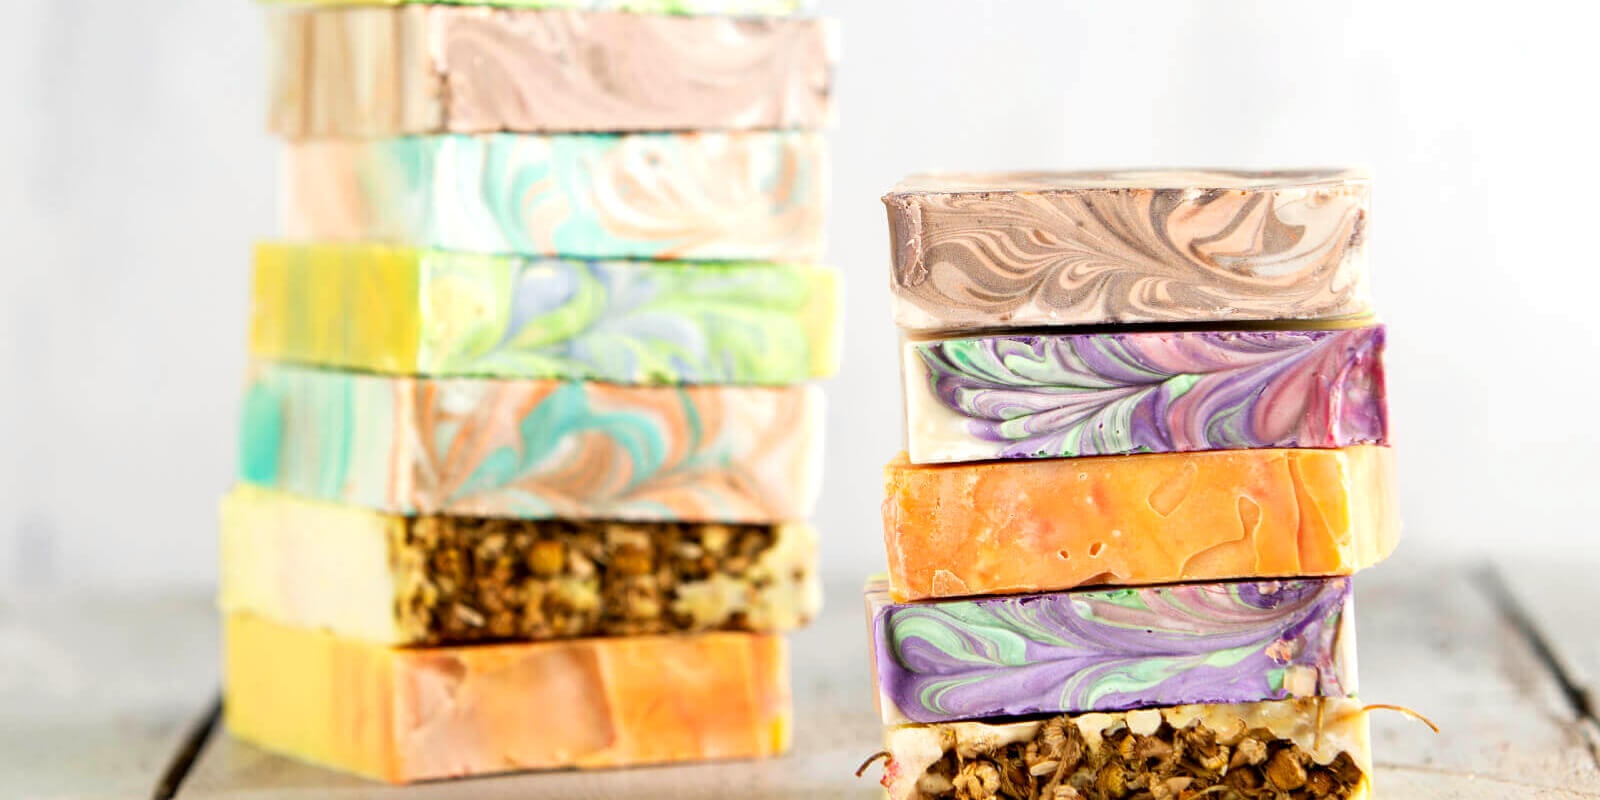 The Solid Bar Company Palm Oil Free Soaps